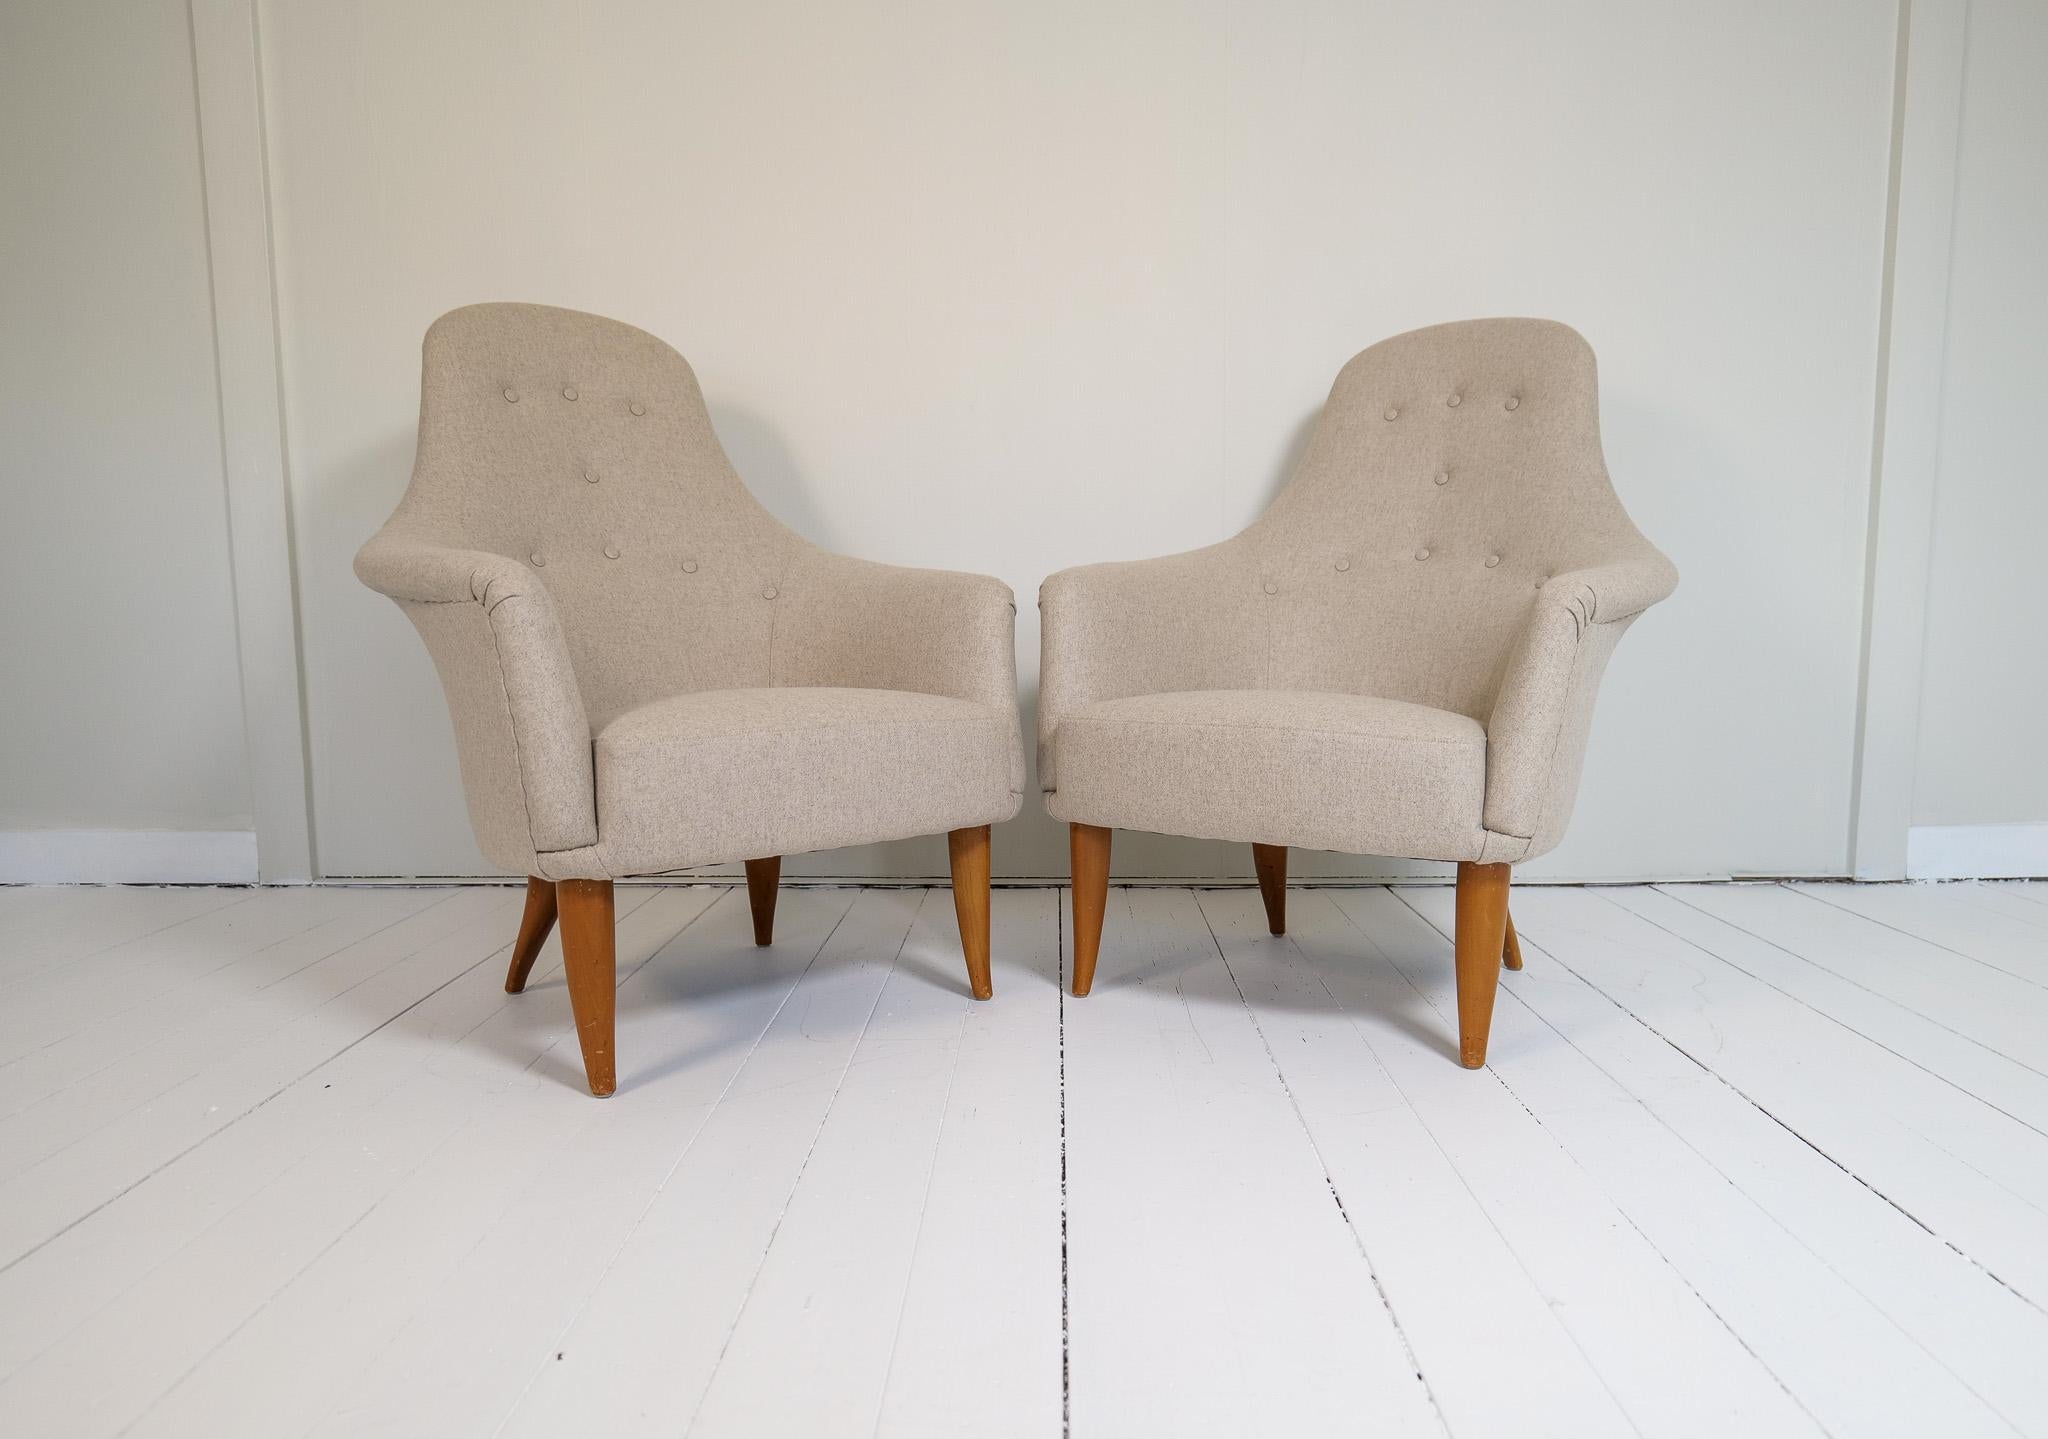 Midcentury Modern Big Adam Lounge Chairs NK, Sweden, 1950s For Sale 8